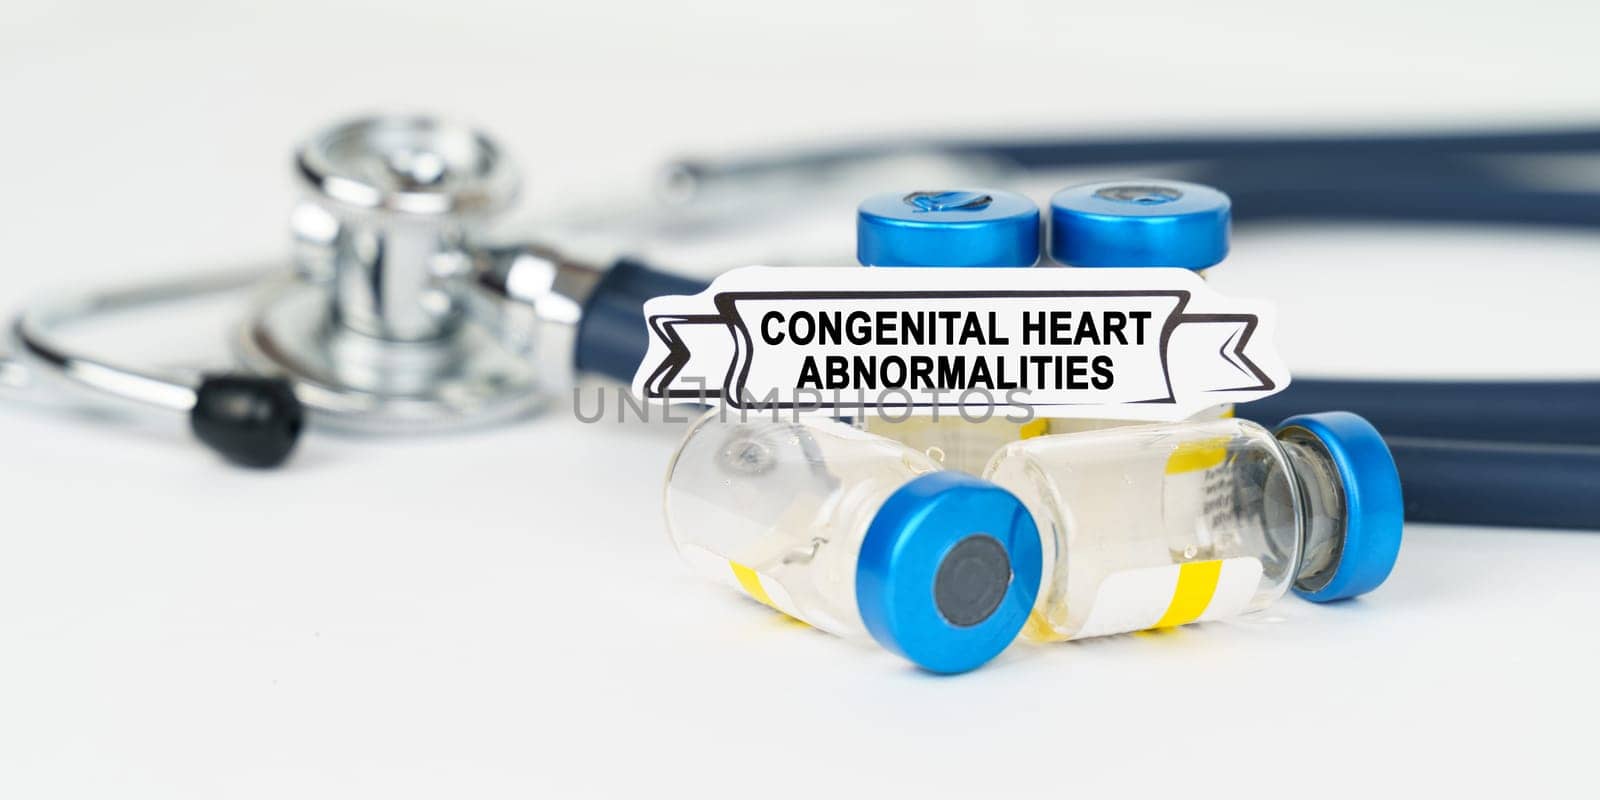 Medical concept. On the table there is a stethoscope, injections and a sign with the inscription - congenital heart abnormalities